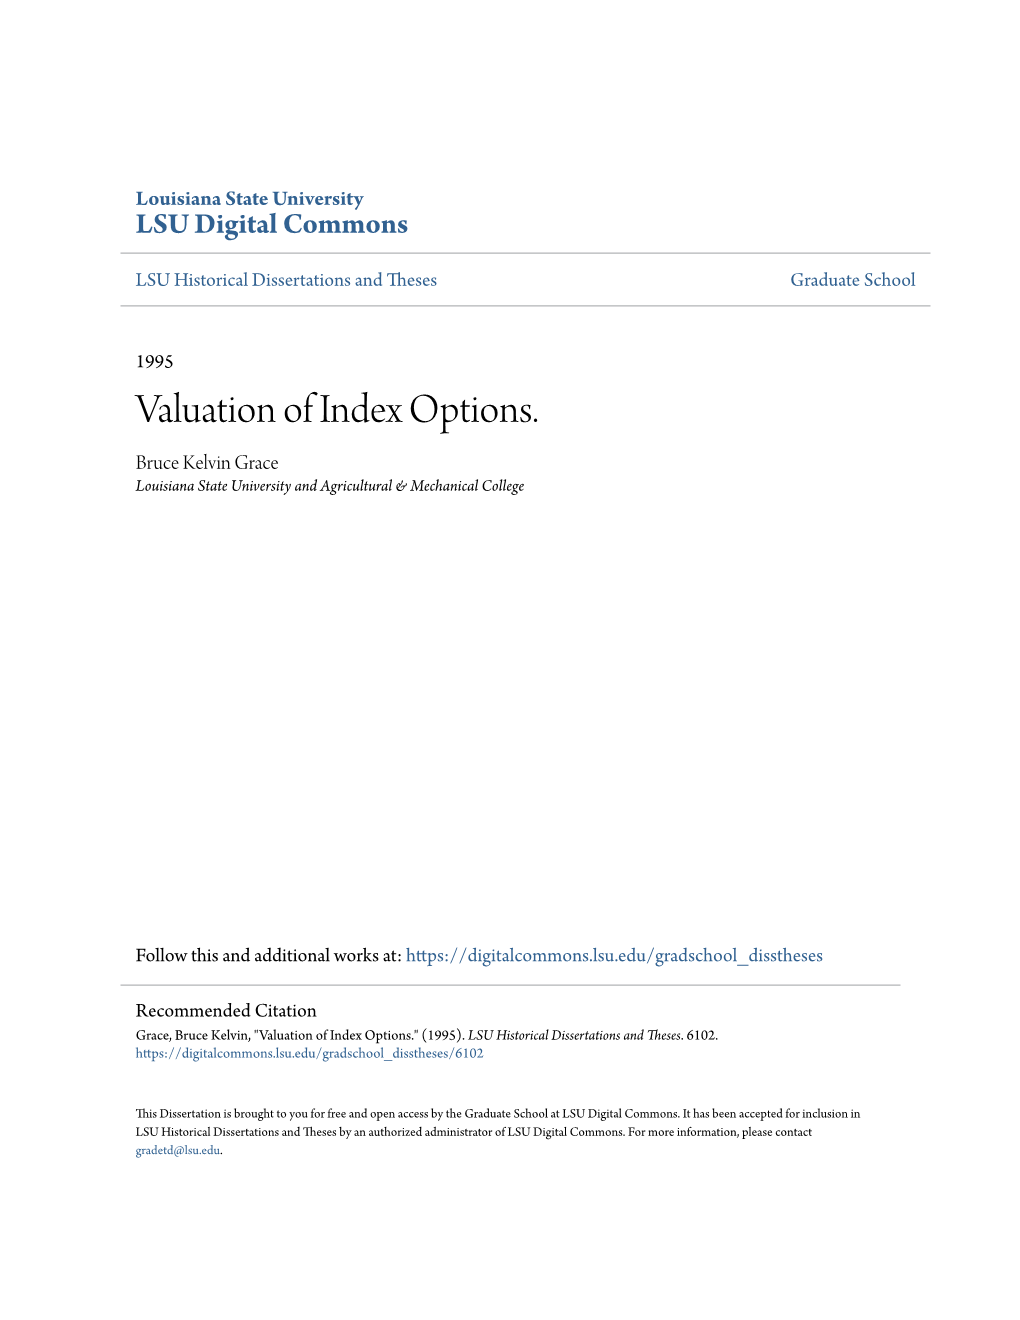 Valuation of Index Options. Bruce Kelvin Grace Louisiana State University and Agricultural & Mechanical College